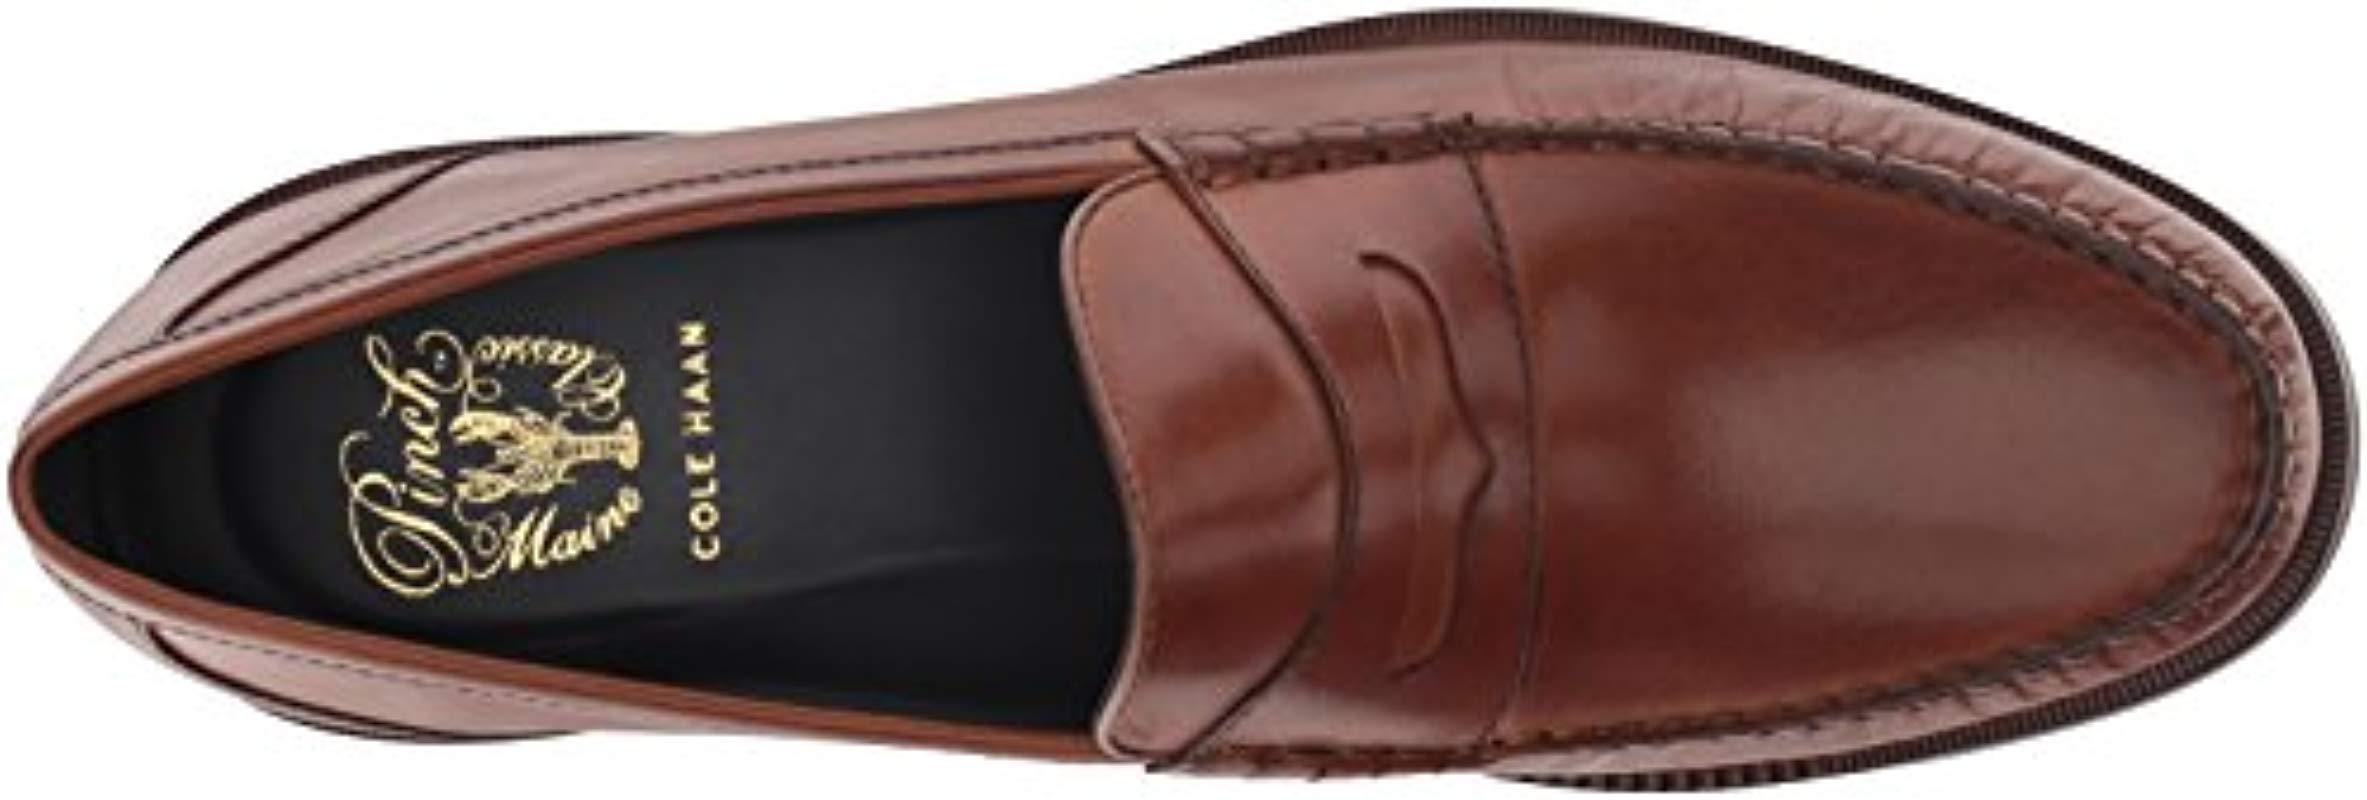 cole haan pinch sanford penny loafer